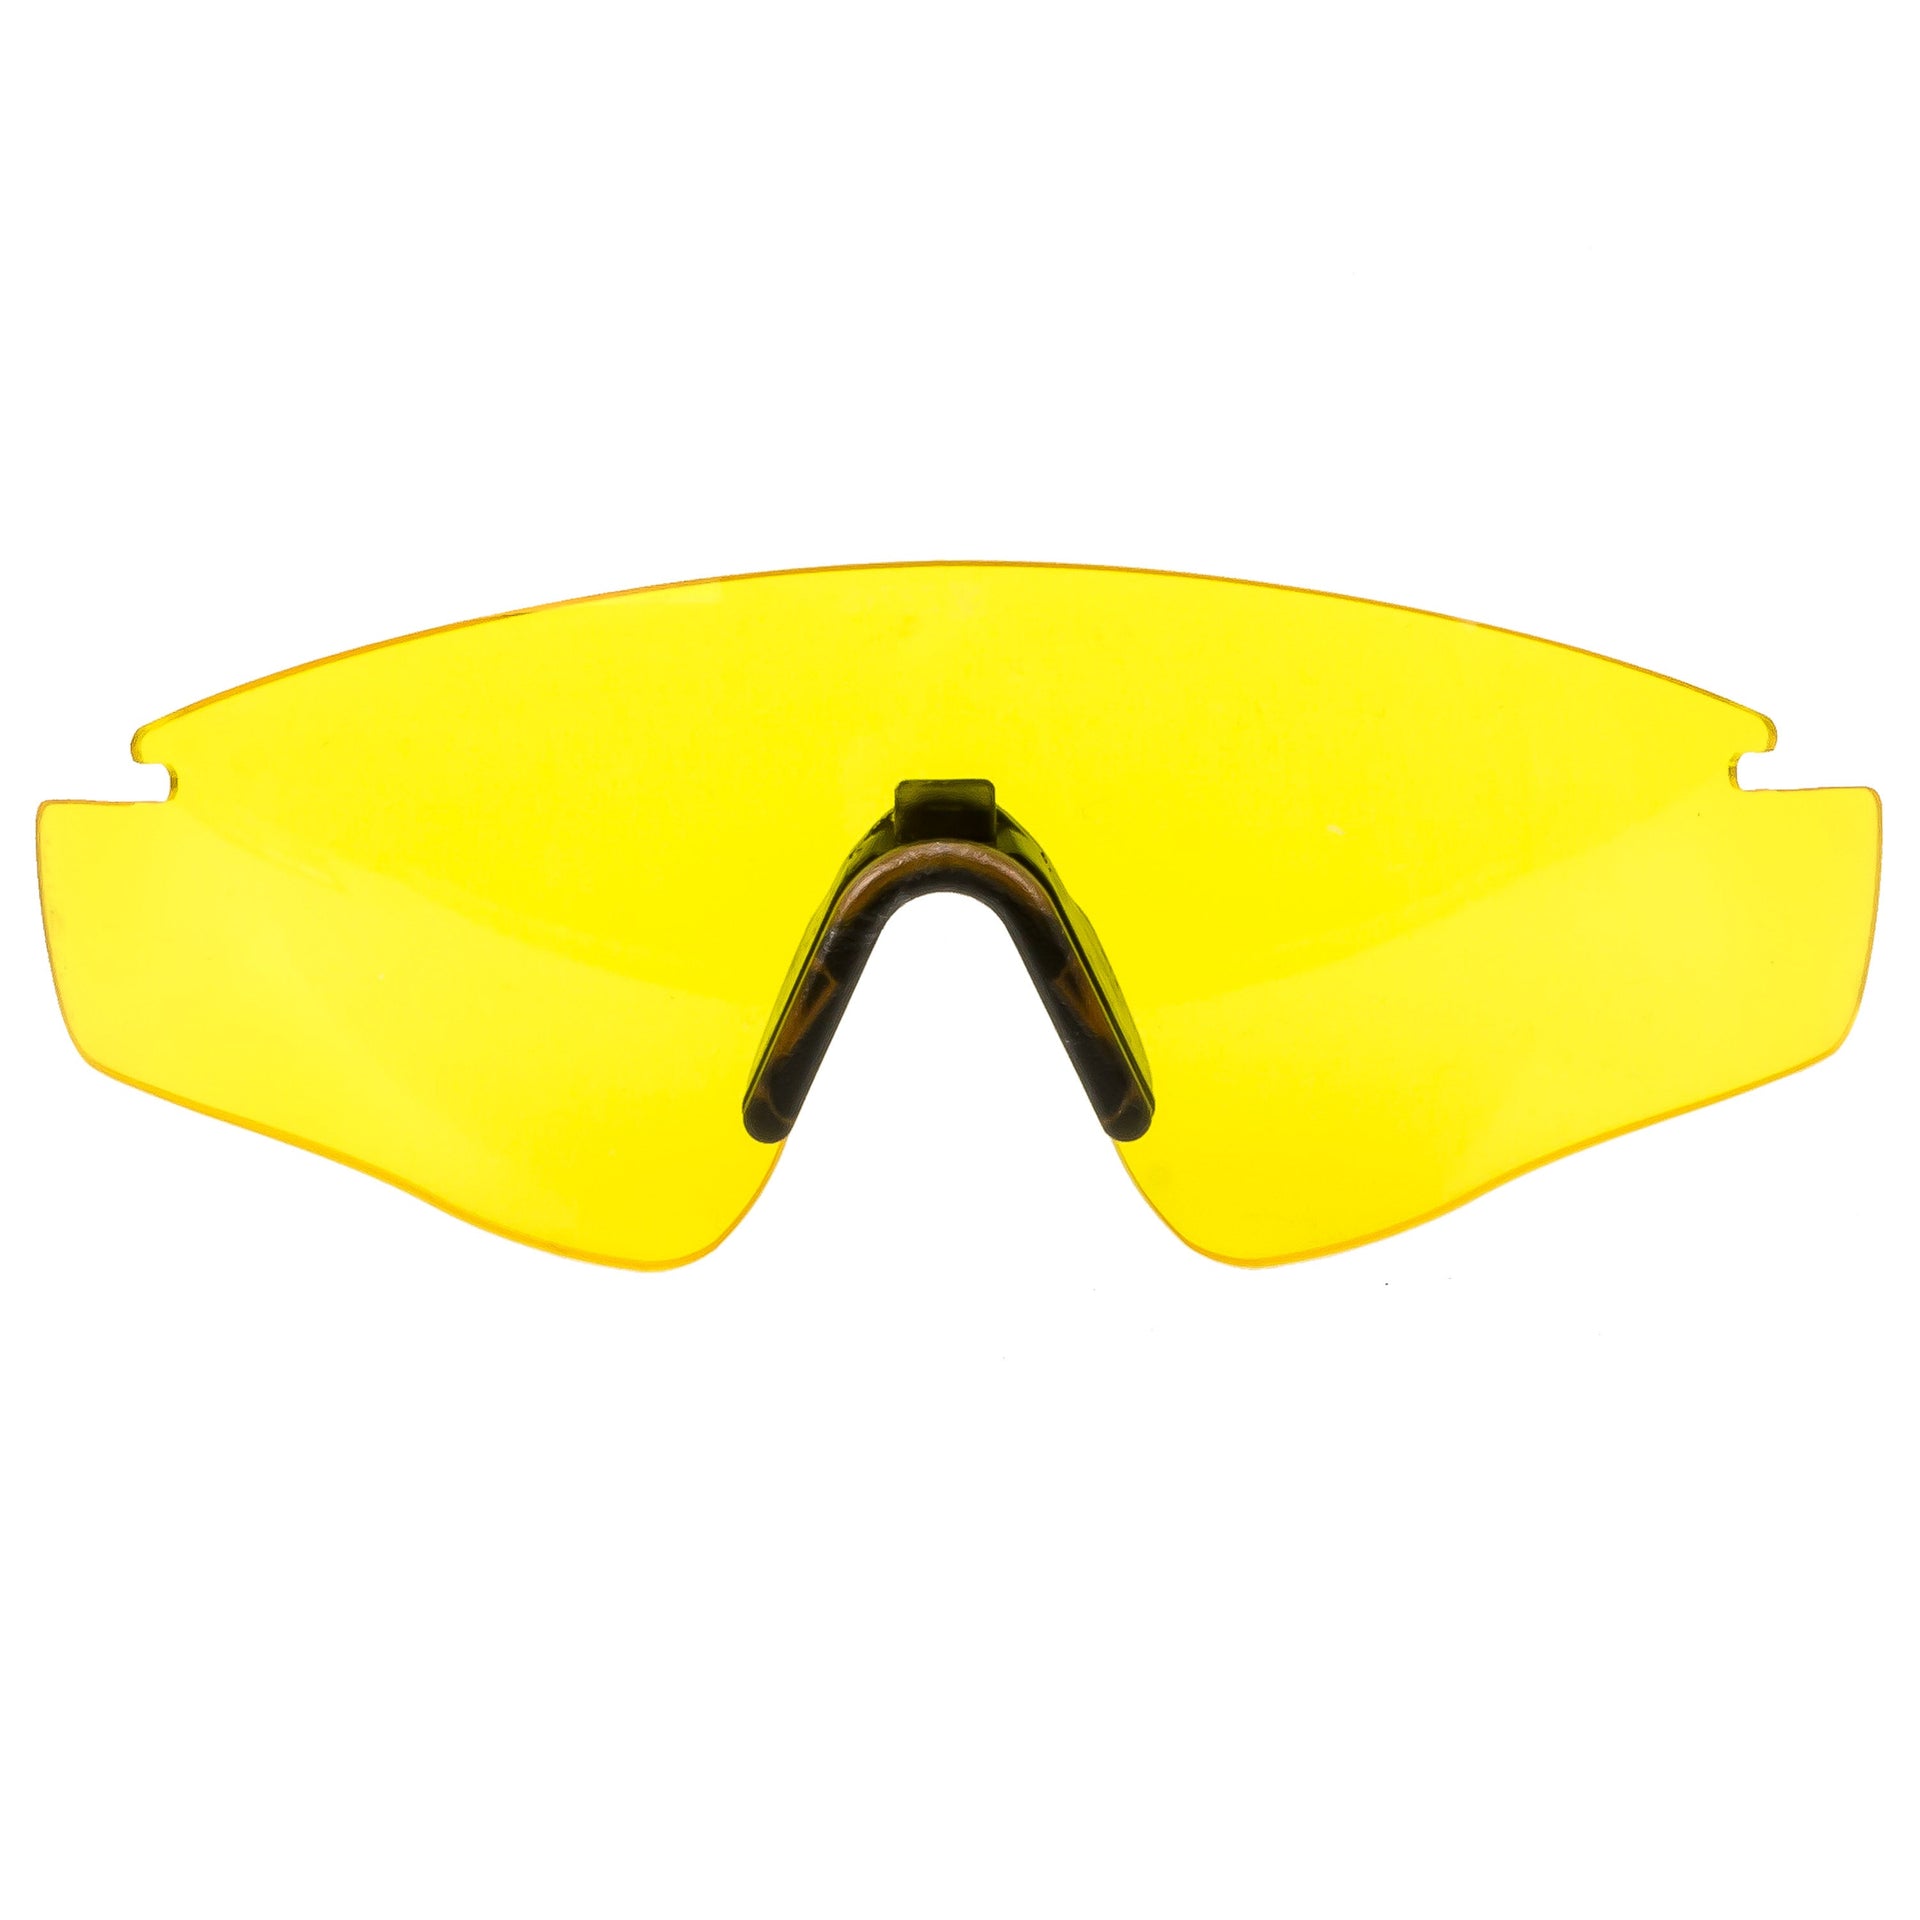 Replacement Lens Sawfly Max-Wrap yellow regular